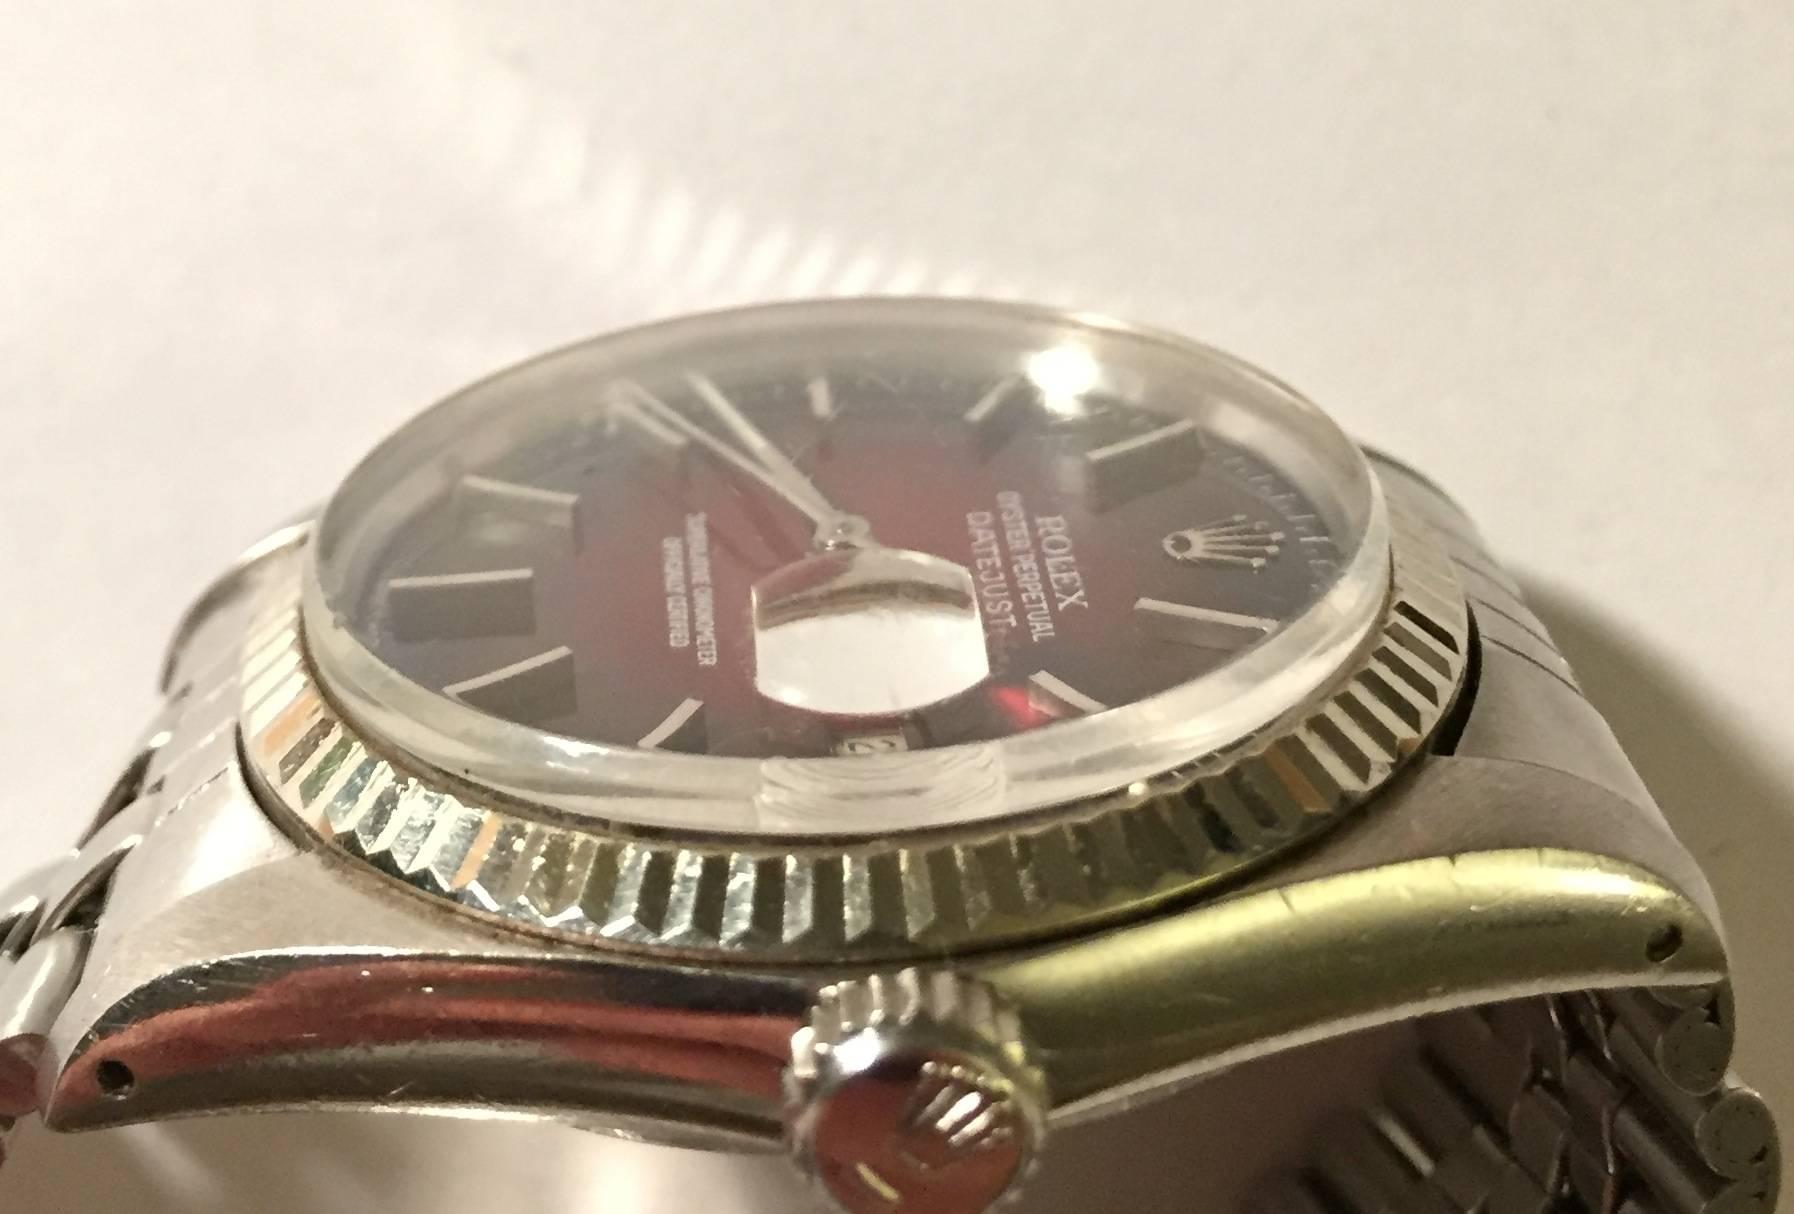 Rolex Vintage White Gold Stainless Steel Datejust Vignette Red Dial Wristwatch 1